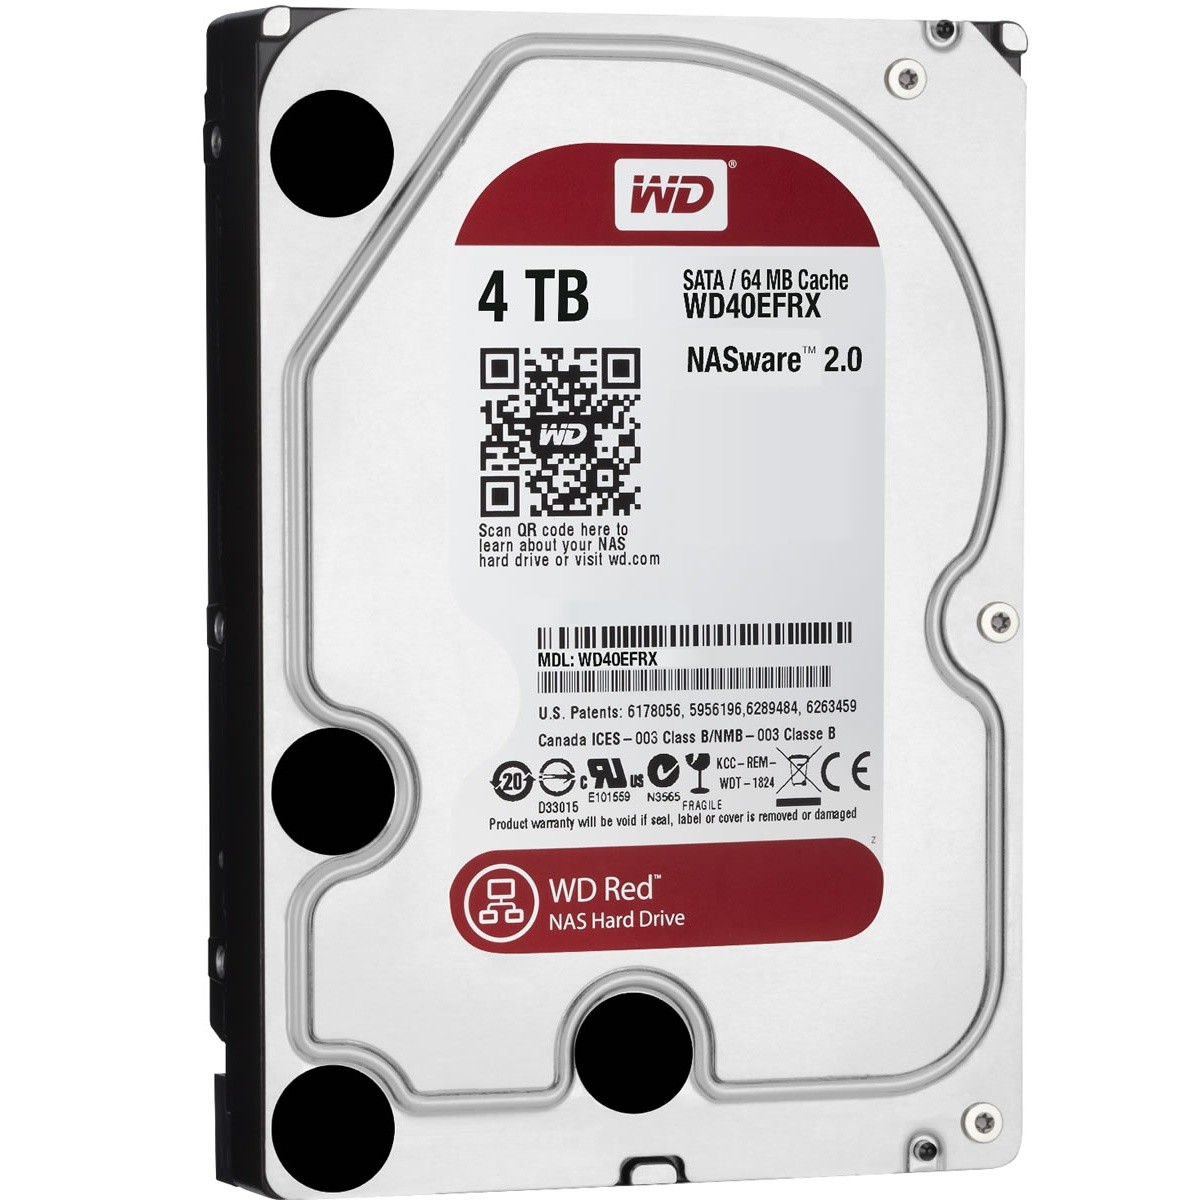 WD RED 4TB 5400RPM 64MB SATA3 6Gbit/sn WD40EFRX NAS HDD